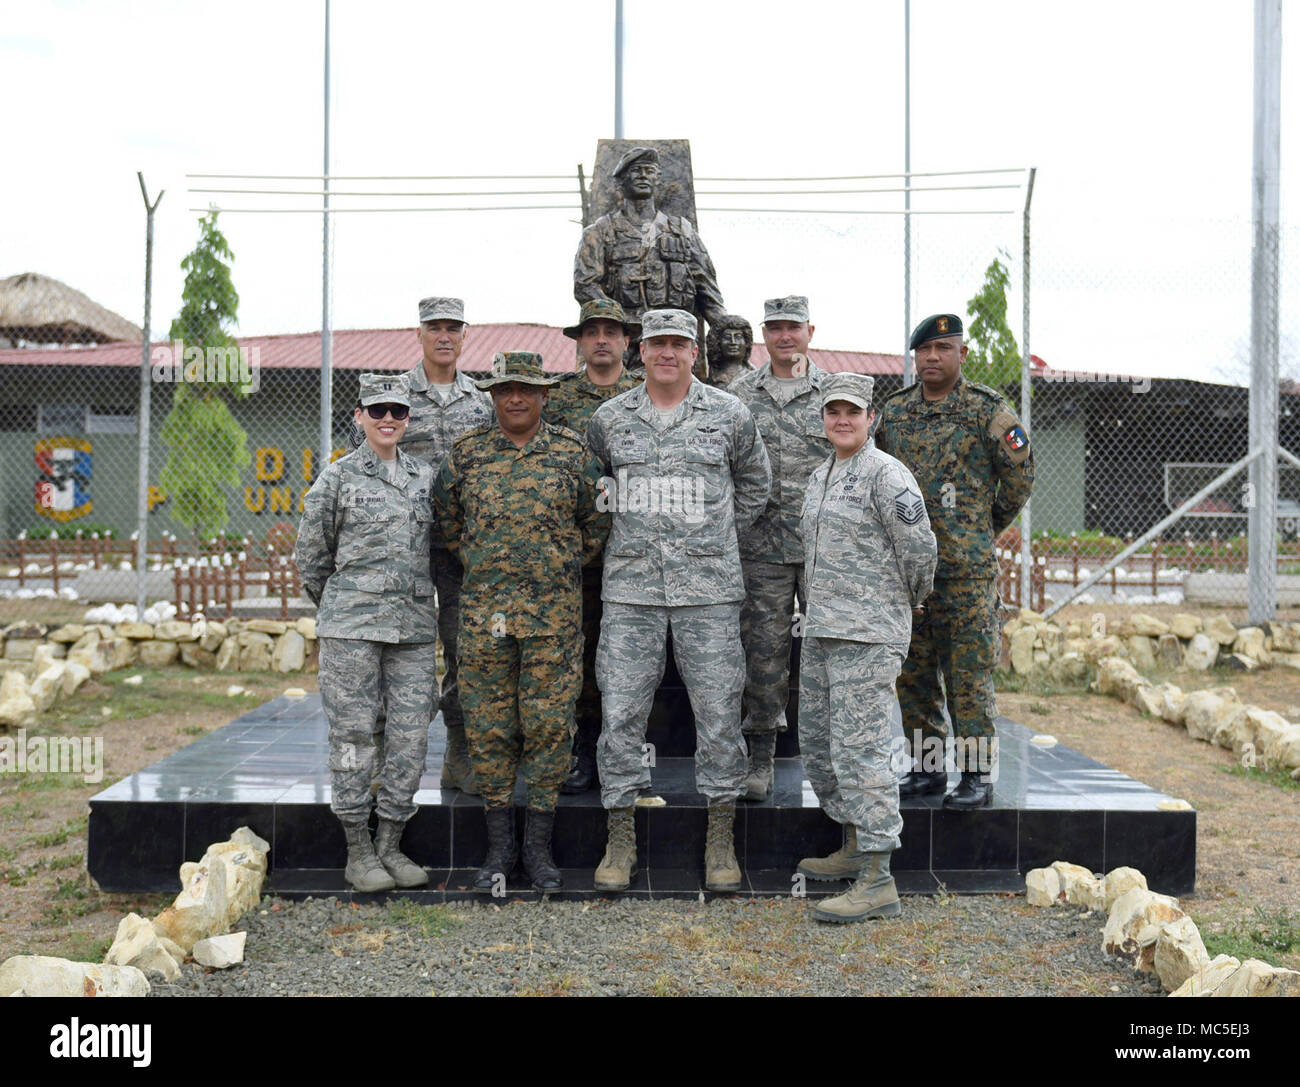 The leadership team of the 346th Air Expeditionary Group and leaders of the Panamanian military and police force known as SENAFRONT, stand for a photo during Exercise New Horizons 2018 April 1, 2018 in Meteti, Panama. Exercise New Horizons is a joint training exercise where all branches of the U.S. military conduct training in civil engineer, medical and support services while benefiting the local community. (U.S. Air Force photo by Senior Airman Dustin Mullen/Released) Stock Photo